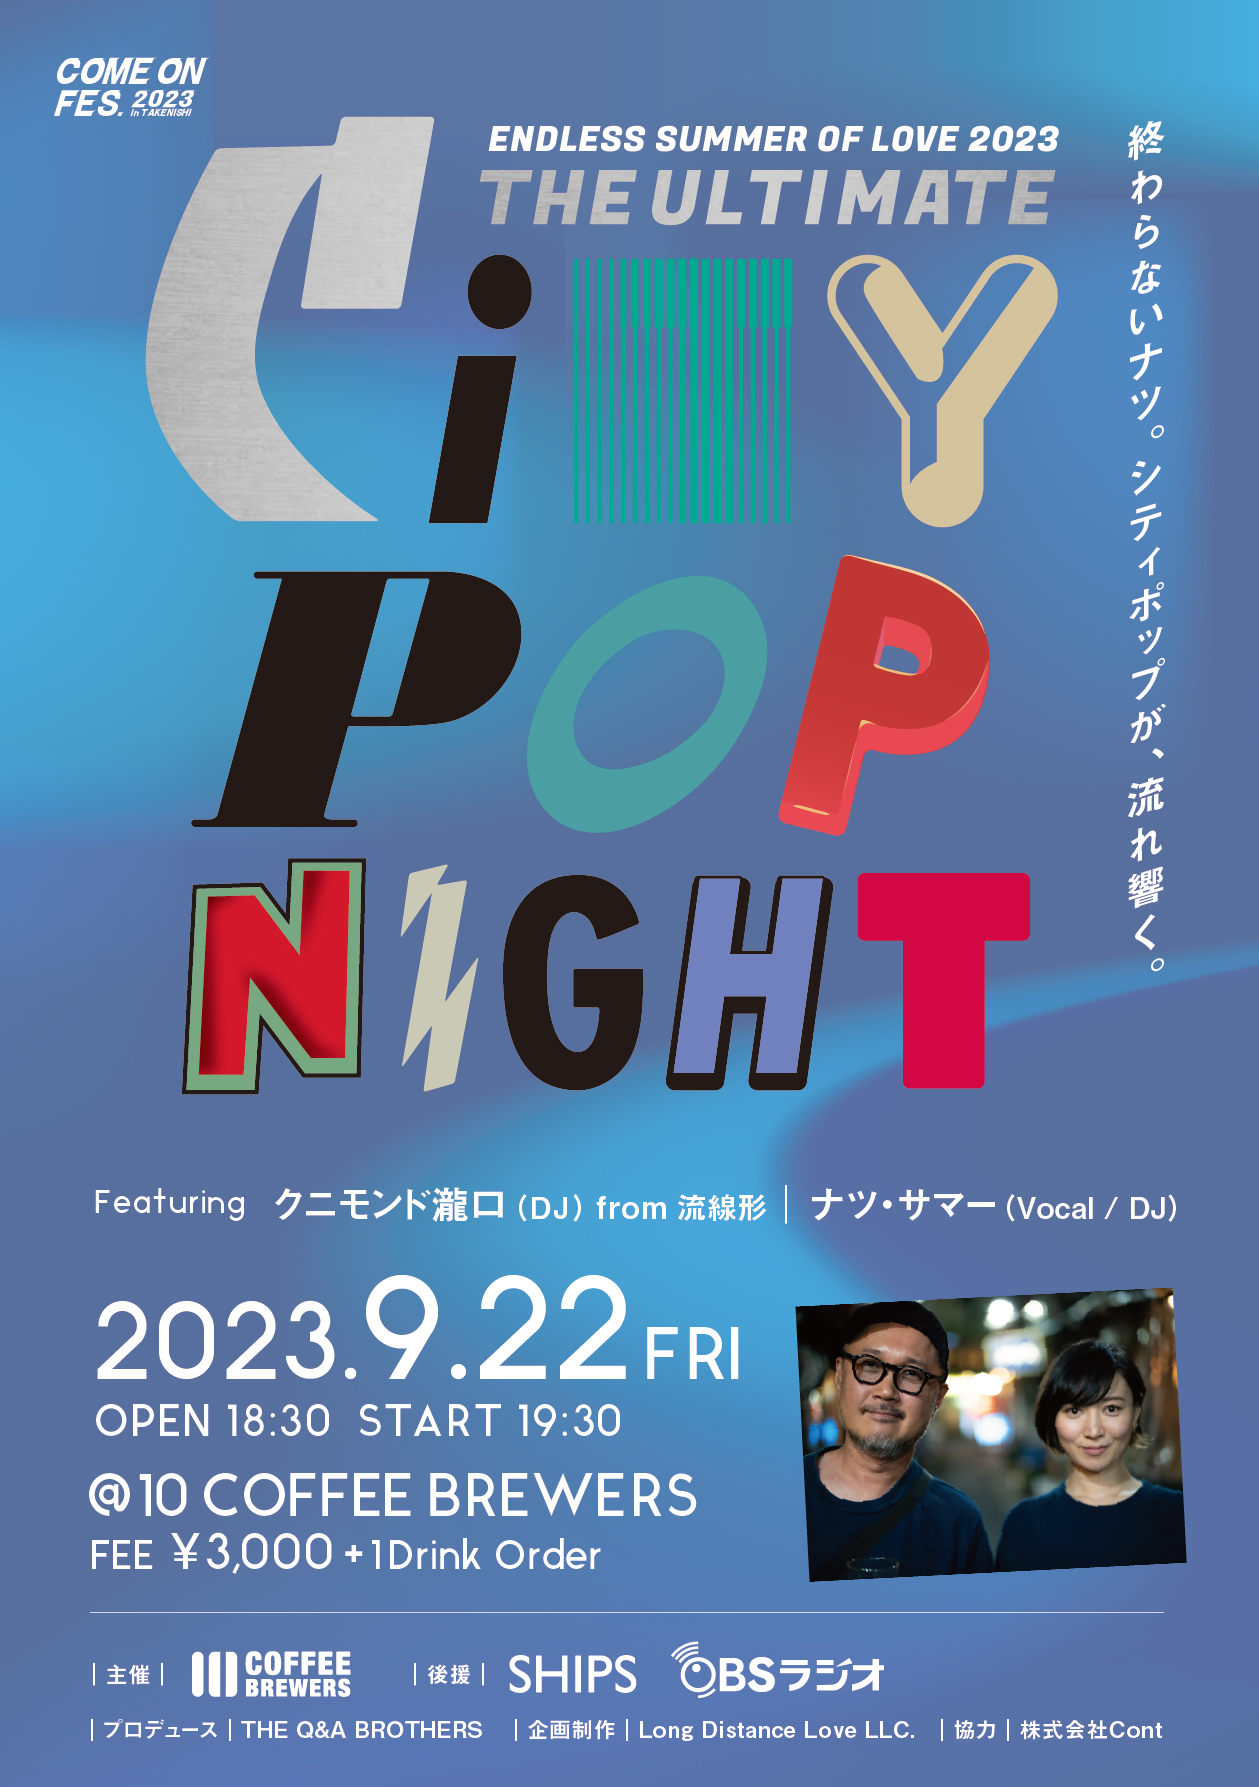 ENDLESS SUMMER OF LOVE 2023「THE ULTIMATE CITY POP NIGHT」